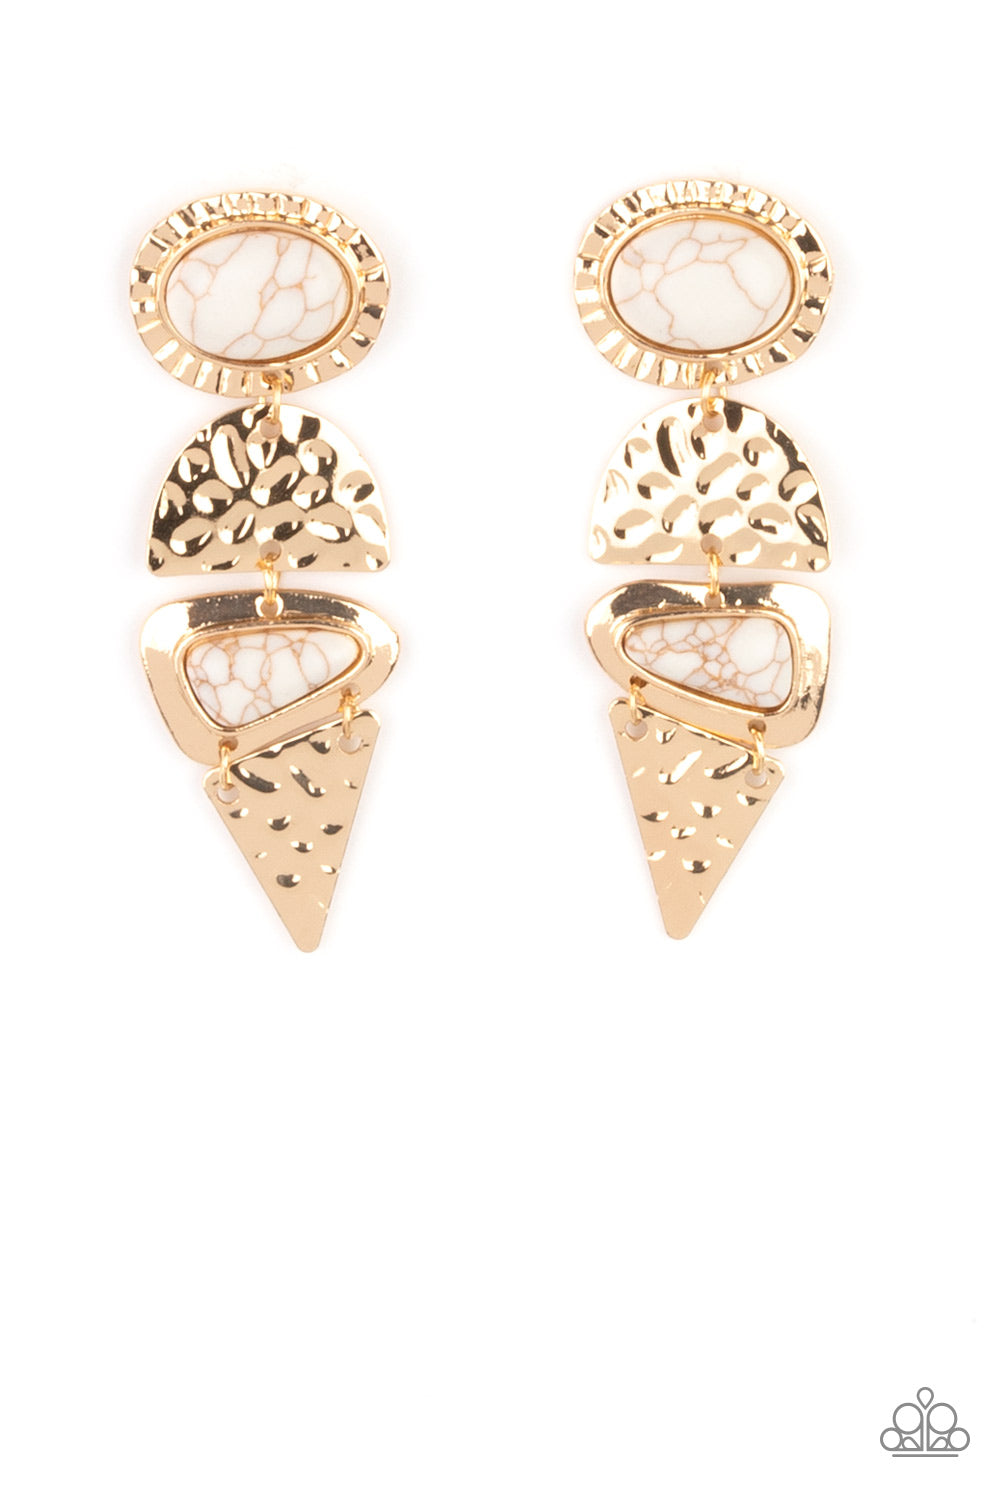 Earthy Extravagance - Gold & White Stone Earrings - Princess Glam Shop